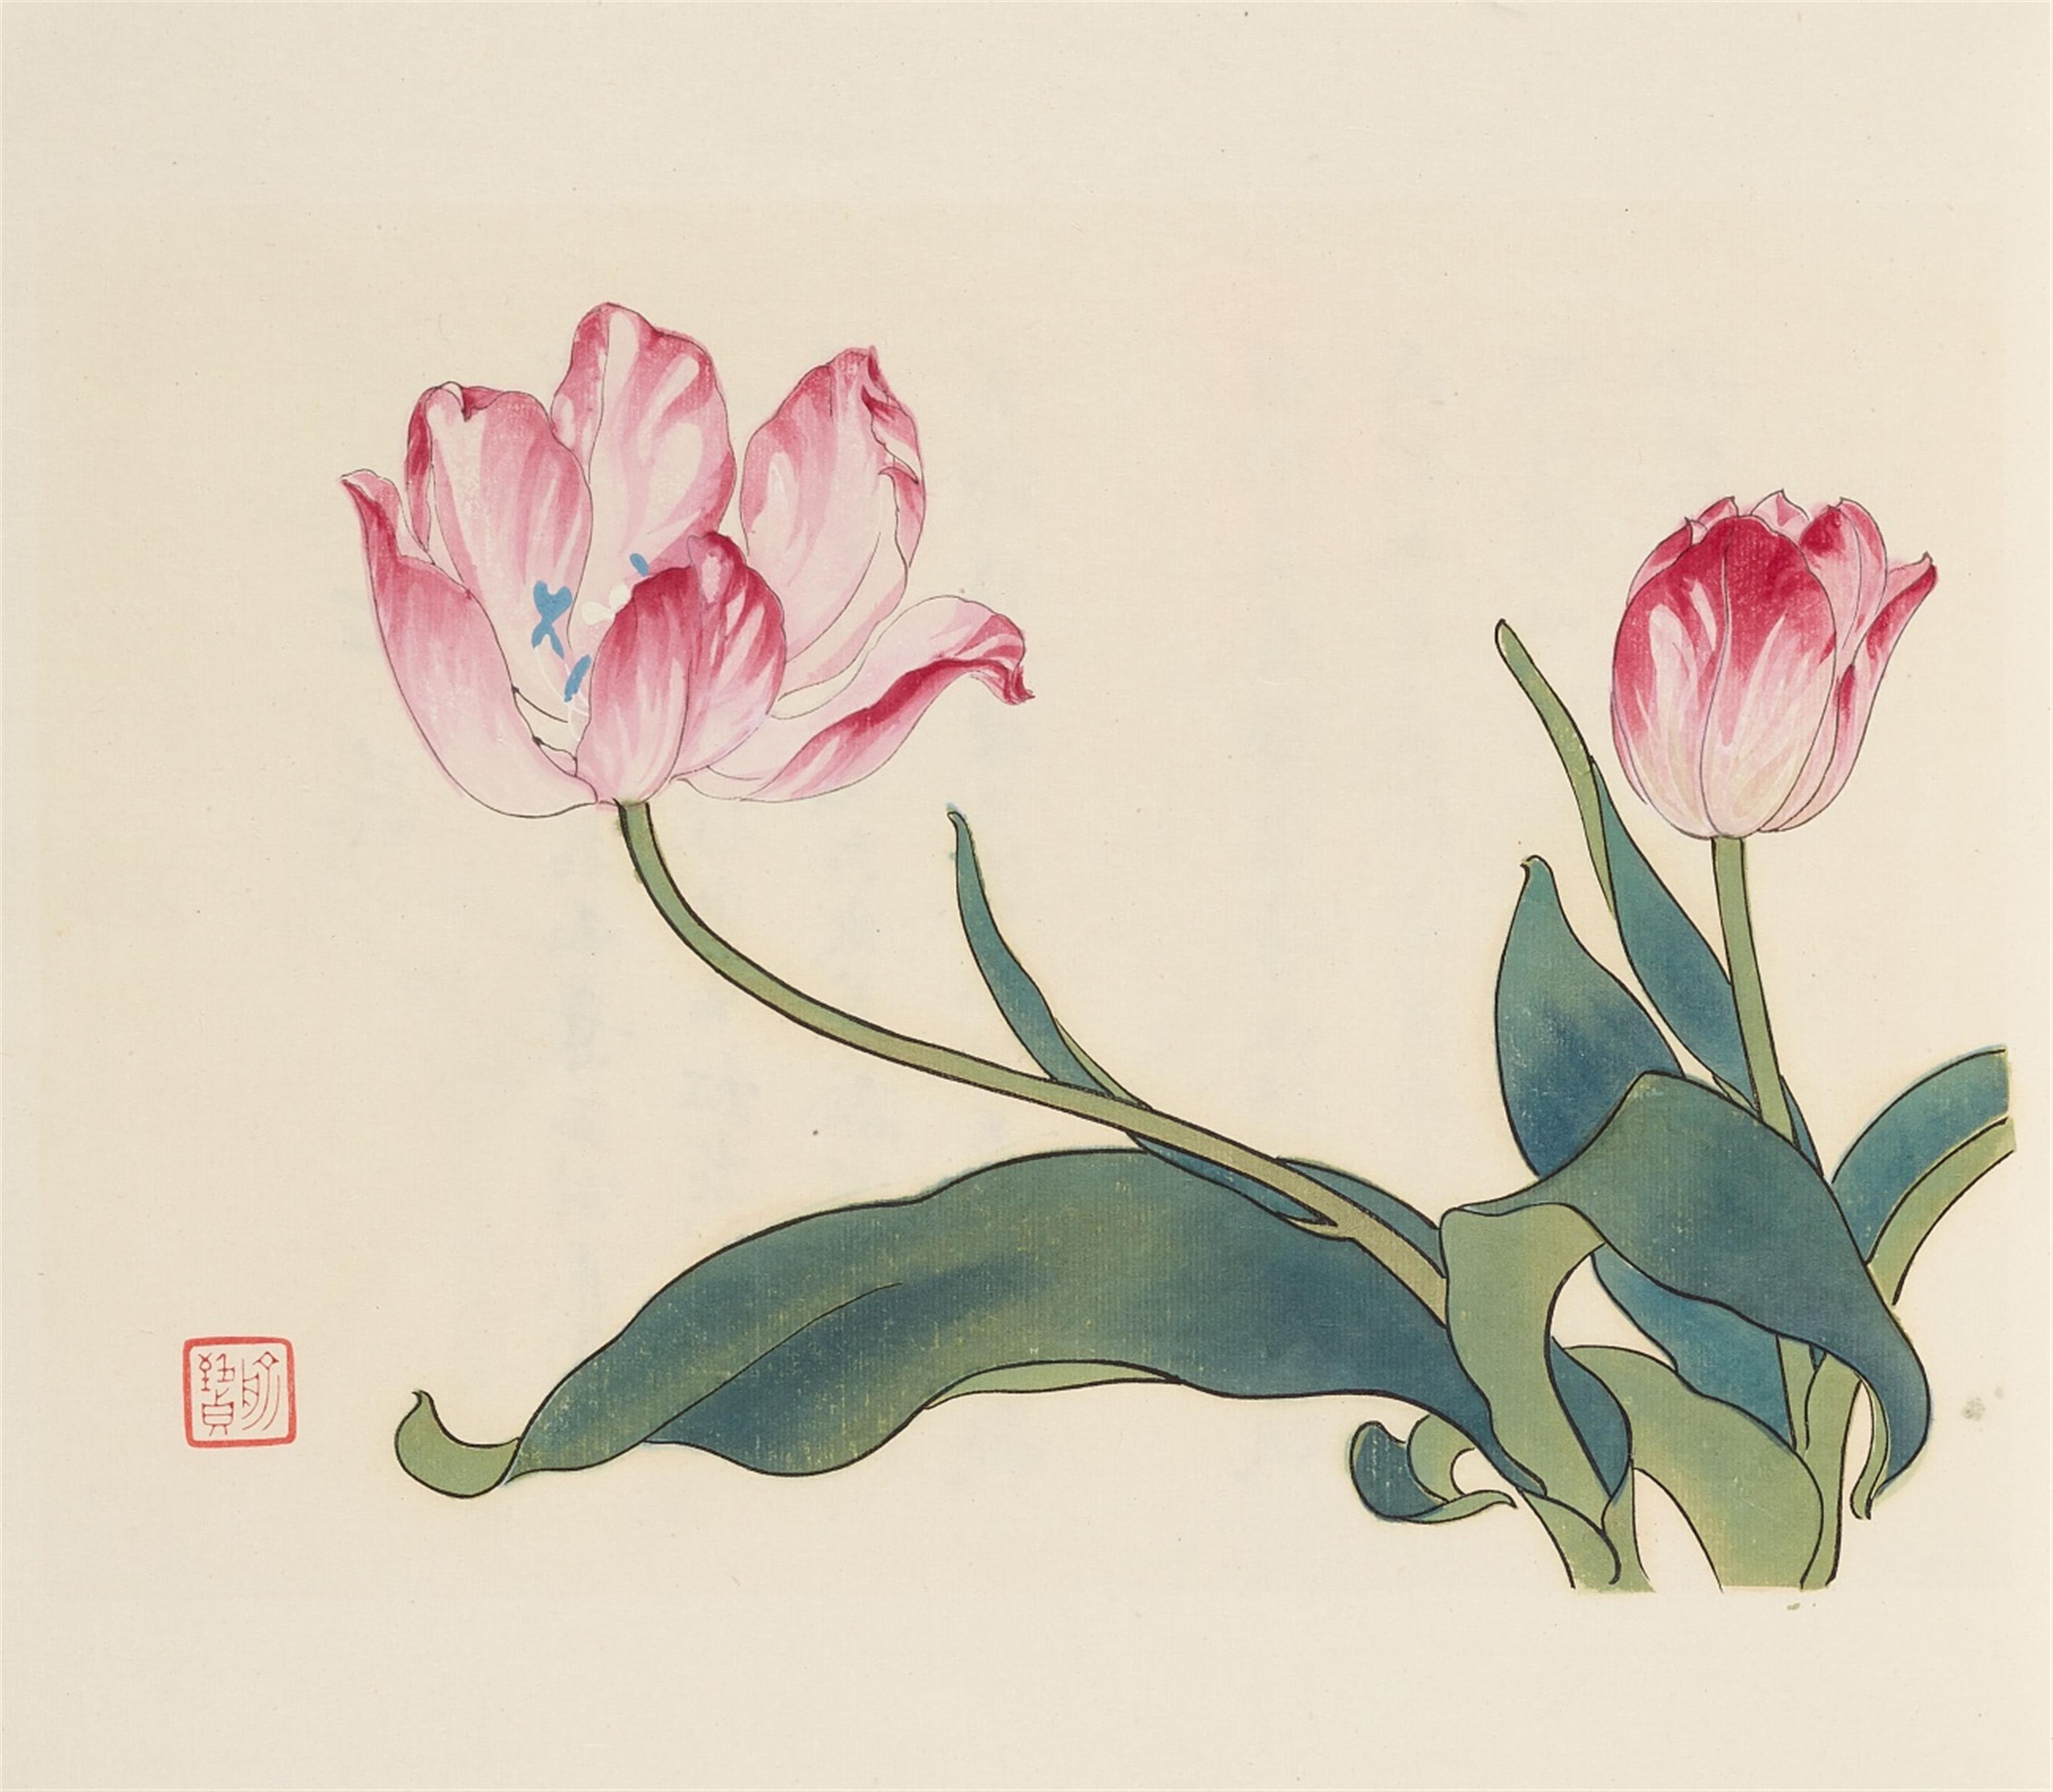 Yu Feian, attributed to
Tian Shiguang and Yu Zhizhen (1915-1995) - One volume of ten titled "Baihua qifang" (A hundred flowers blossom) with ten colour woodblock prints. Rongbaozhai, Beijing 1960, 6th month. - image-2